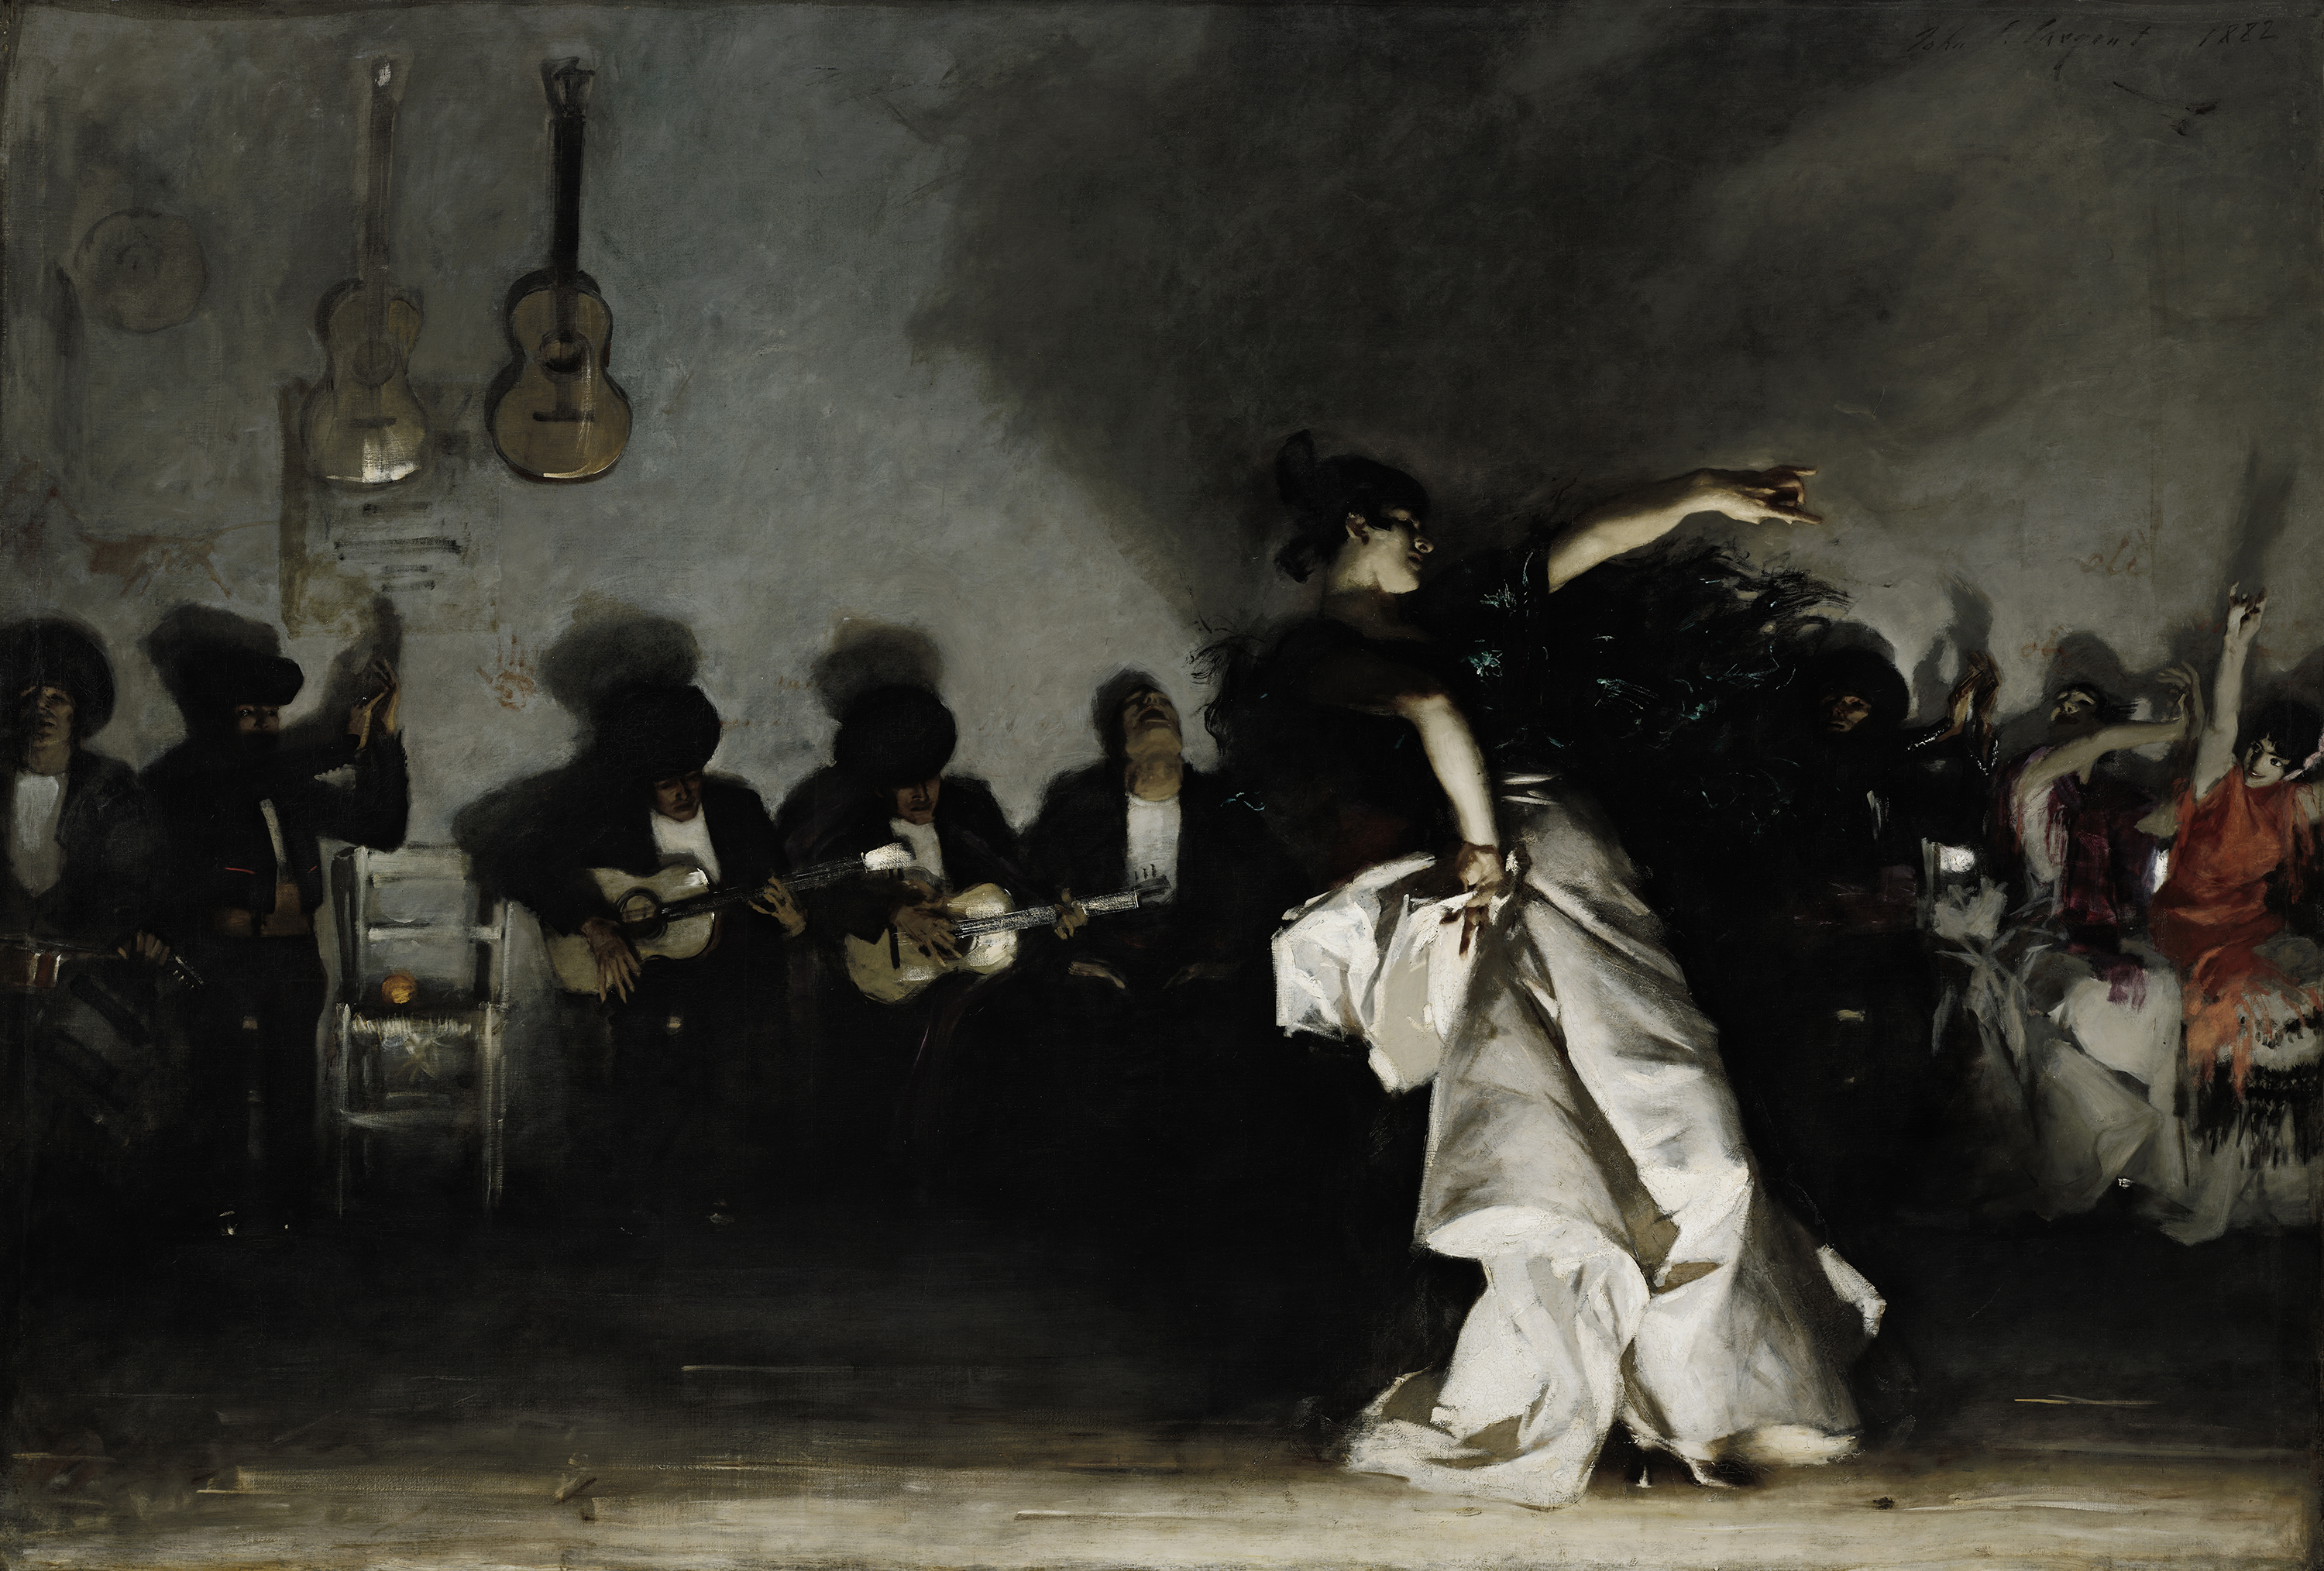 Painting: a woman in a gown dances in front of a line of seated musicians